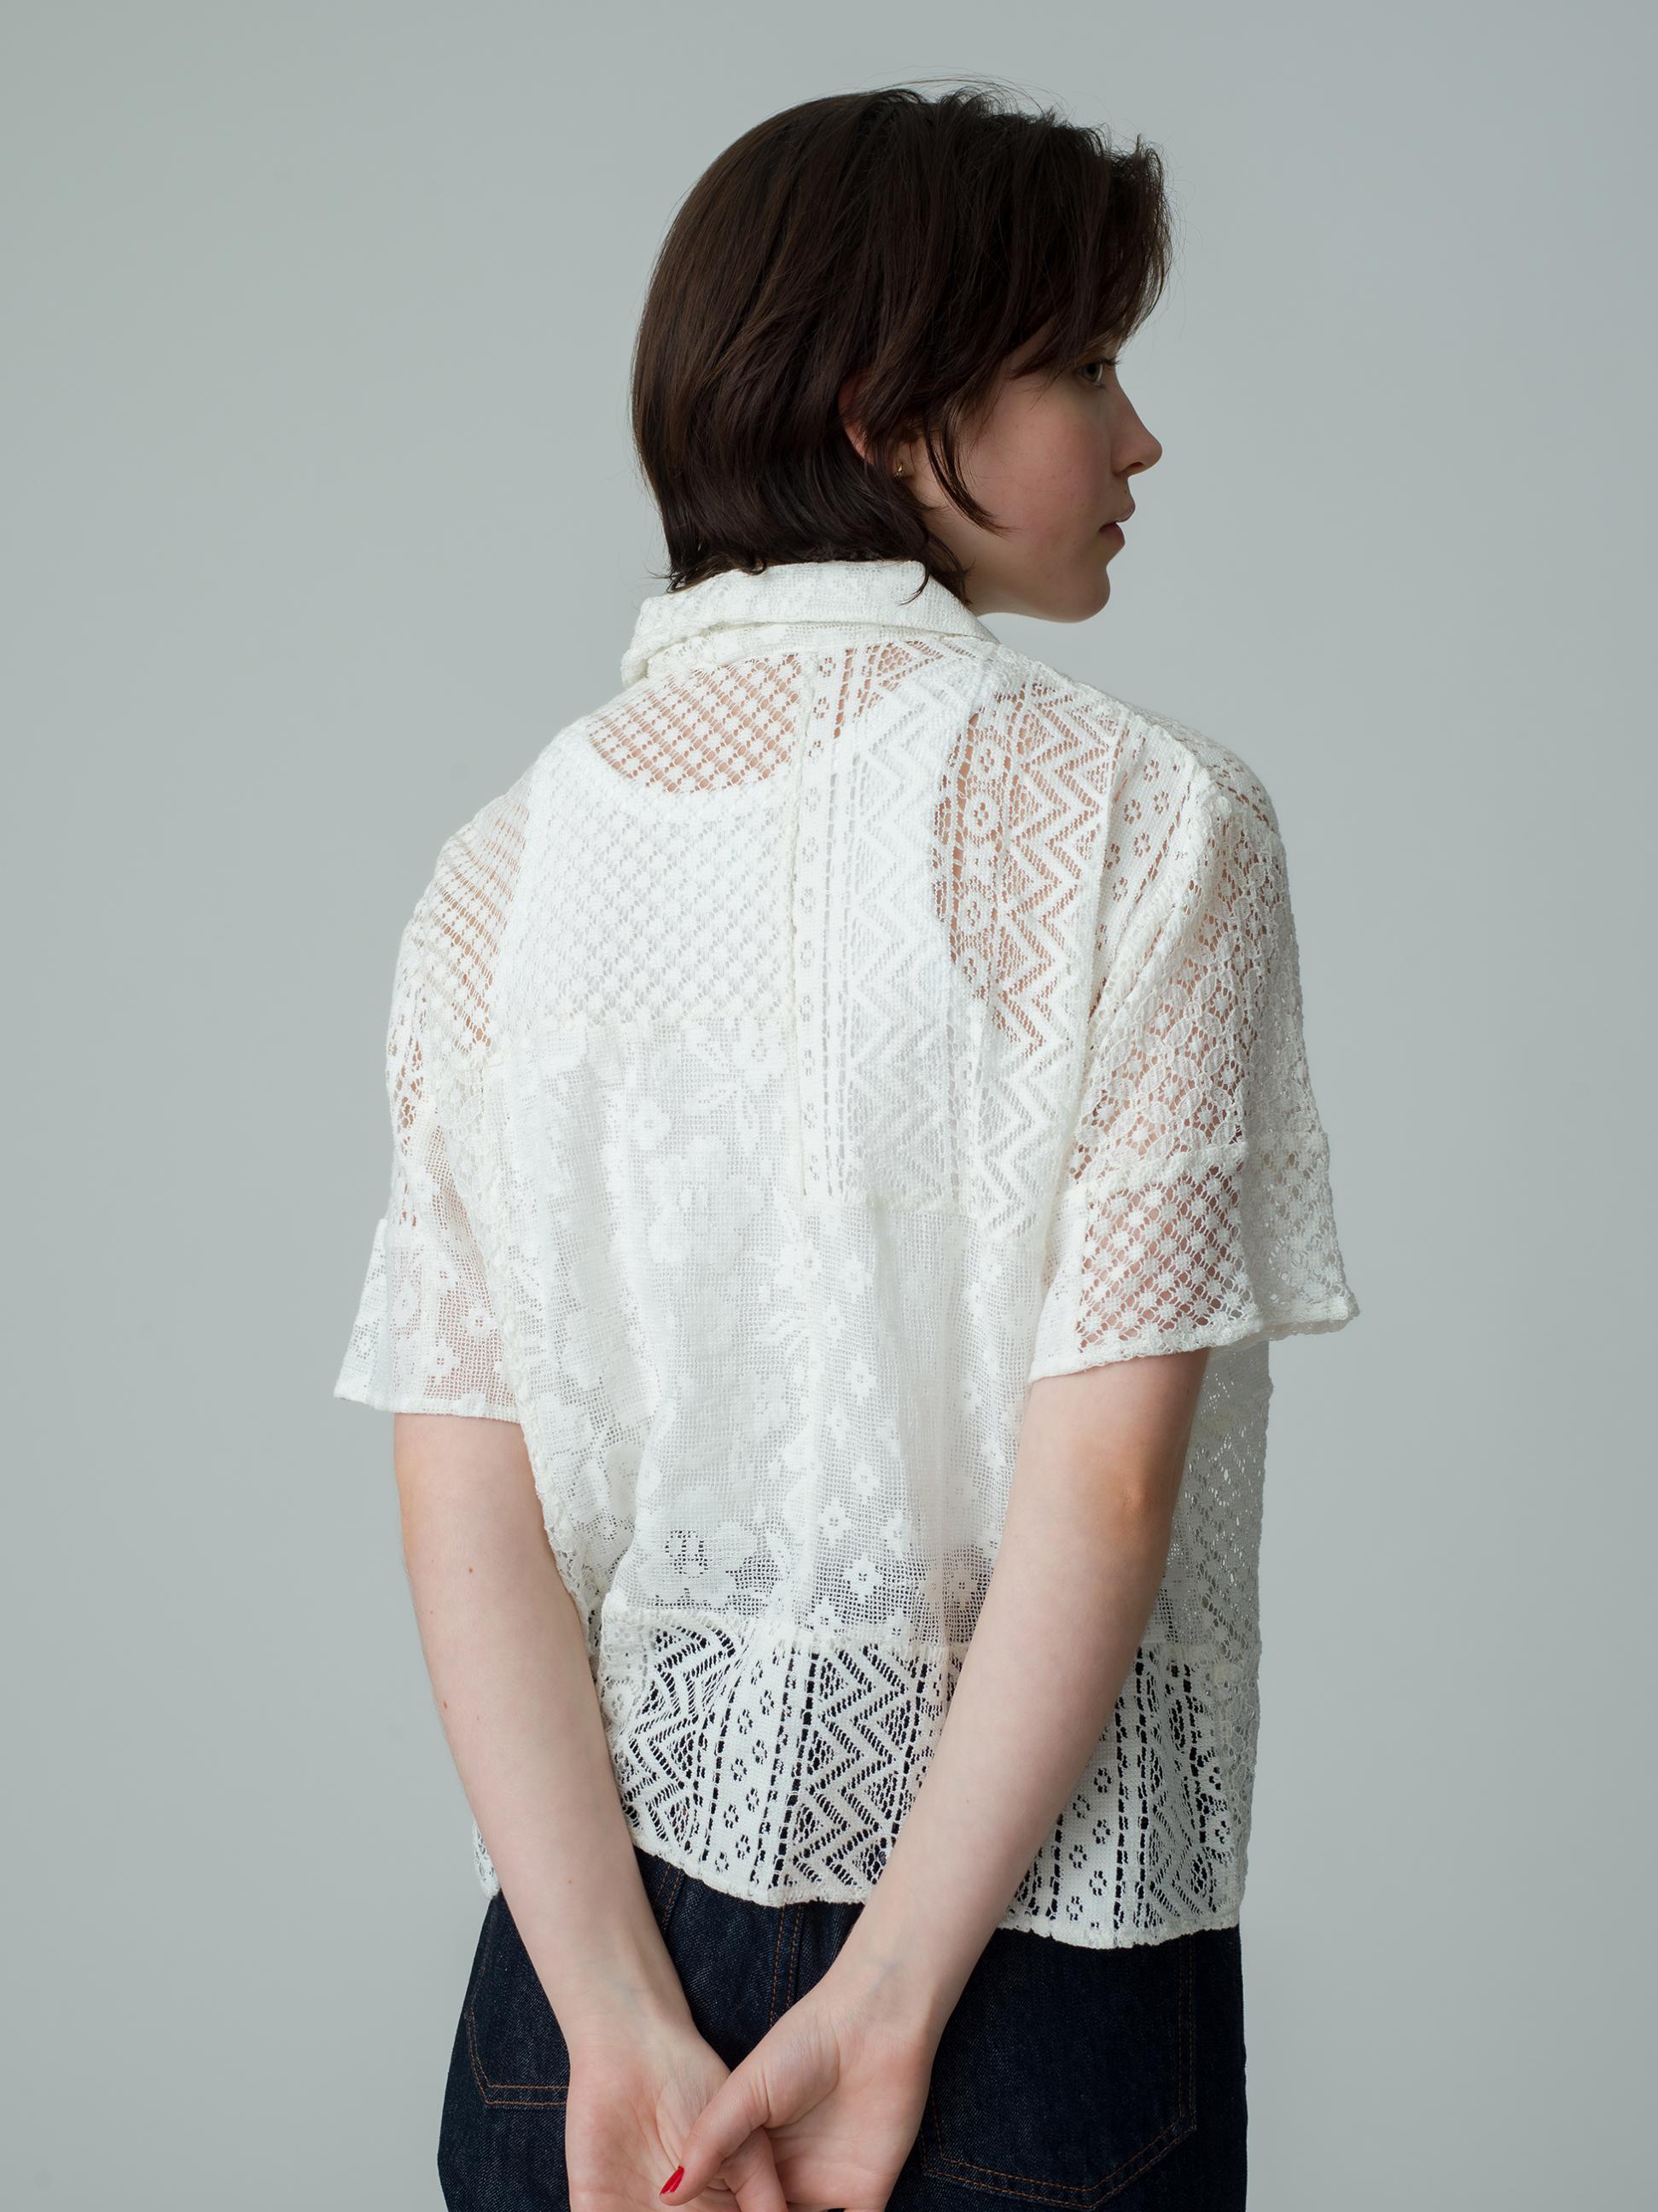 Patch Work Lace Shirt 